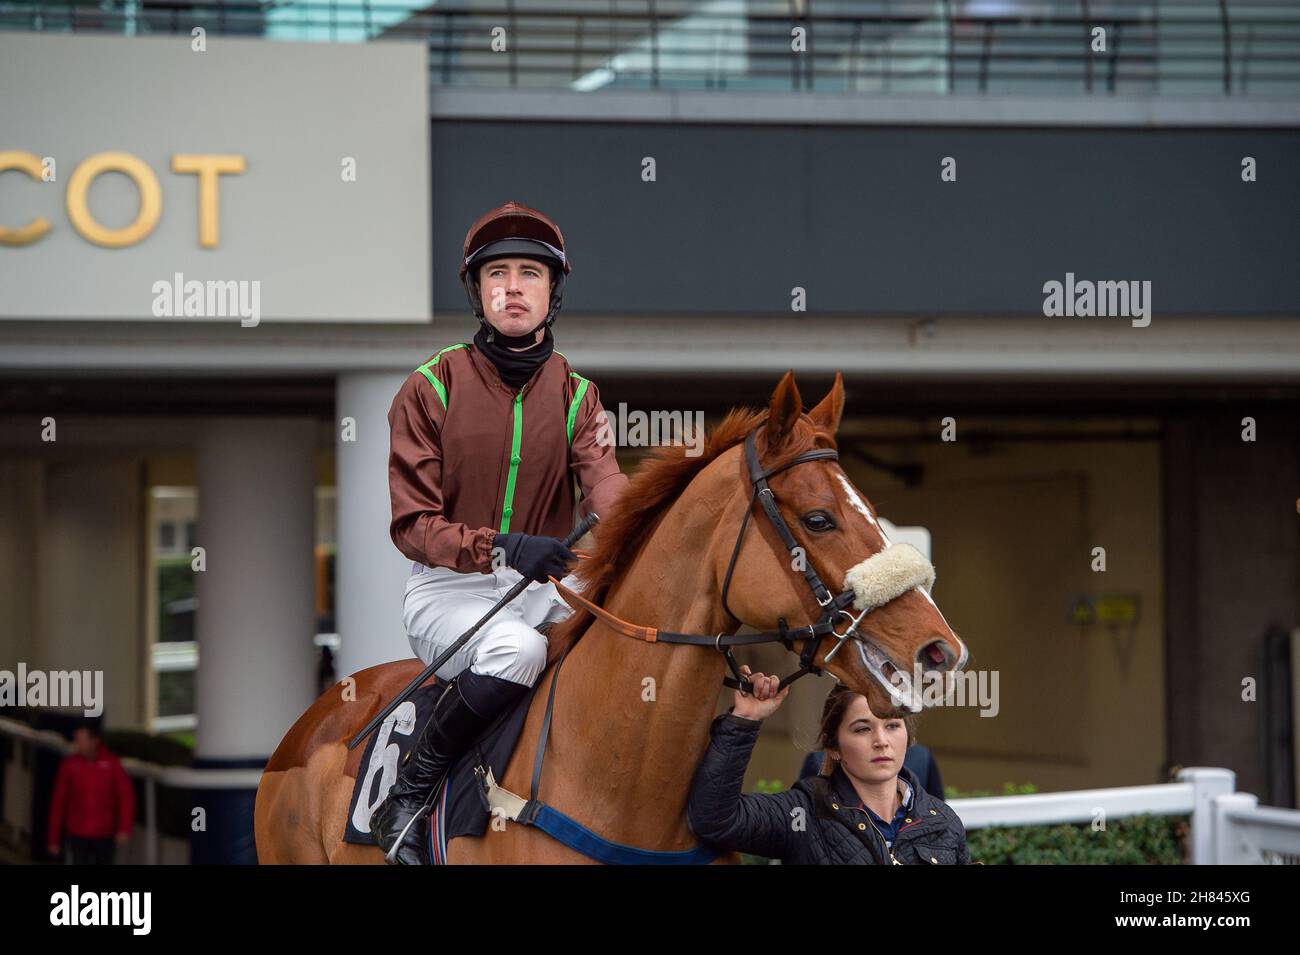 Ascot, Berkshire, UK. 19th November, 2021. Jockey Paul O'Brien on horse Universal Secret (Trainer Helen Nelmes, Dorchester) heads out onto the racetrack at Ascot to race in the Ascot Shop National Hunt Maiden Hurdle Race at Ascot. Credit: Maureen McLean/Alamy Stock Photo